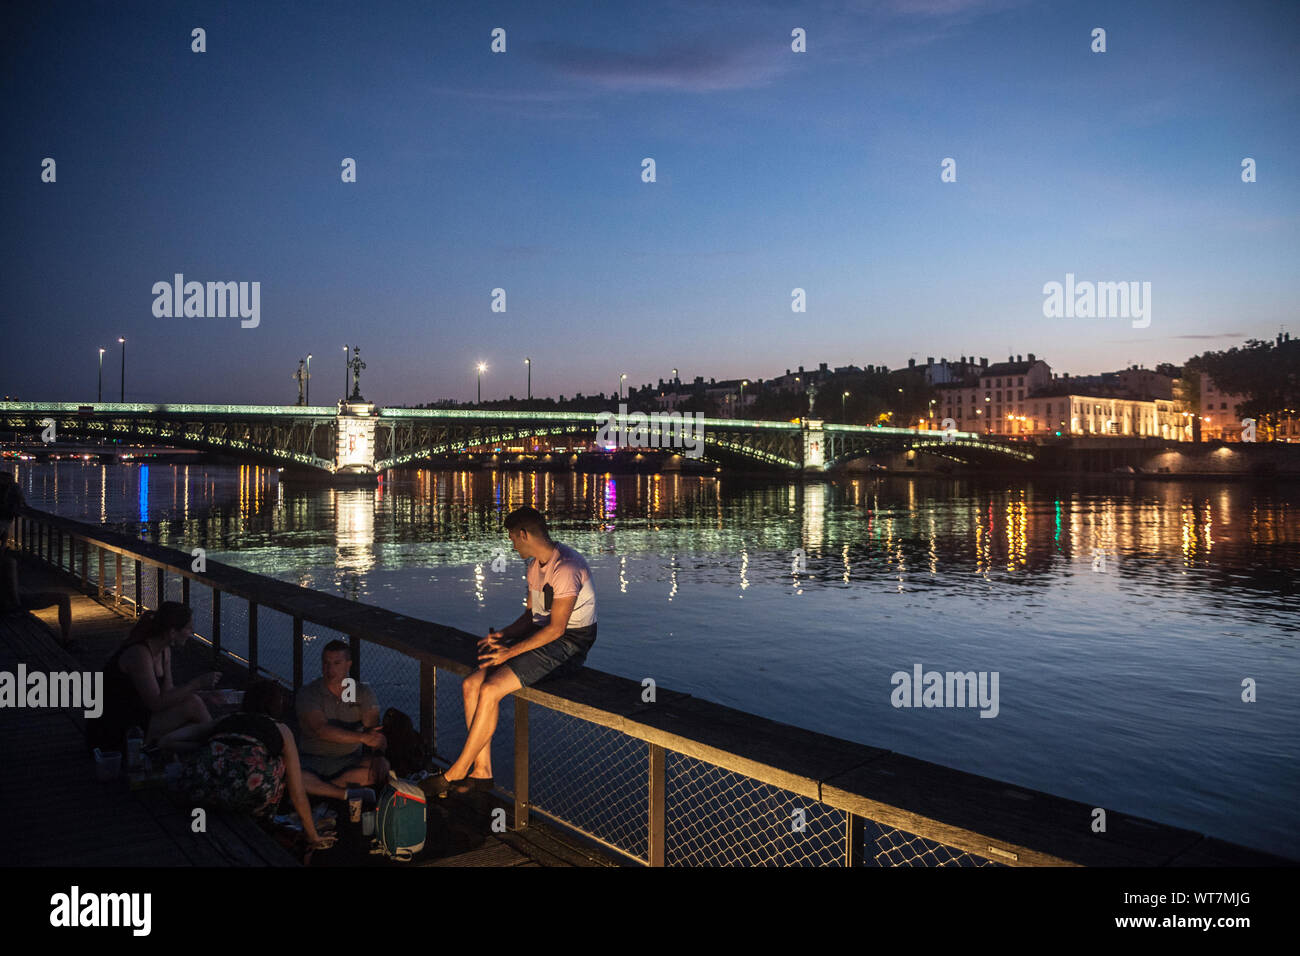 LYON, FRANCE - JULY 18, 2019: French people, mainly men sitting on the riverbank of the Rhone (quais) in the evening drinking alcohol while people are Stock Photo